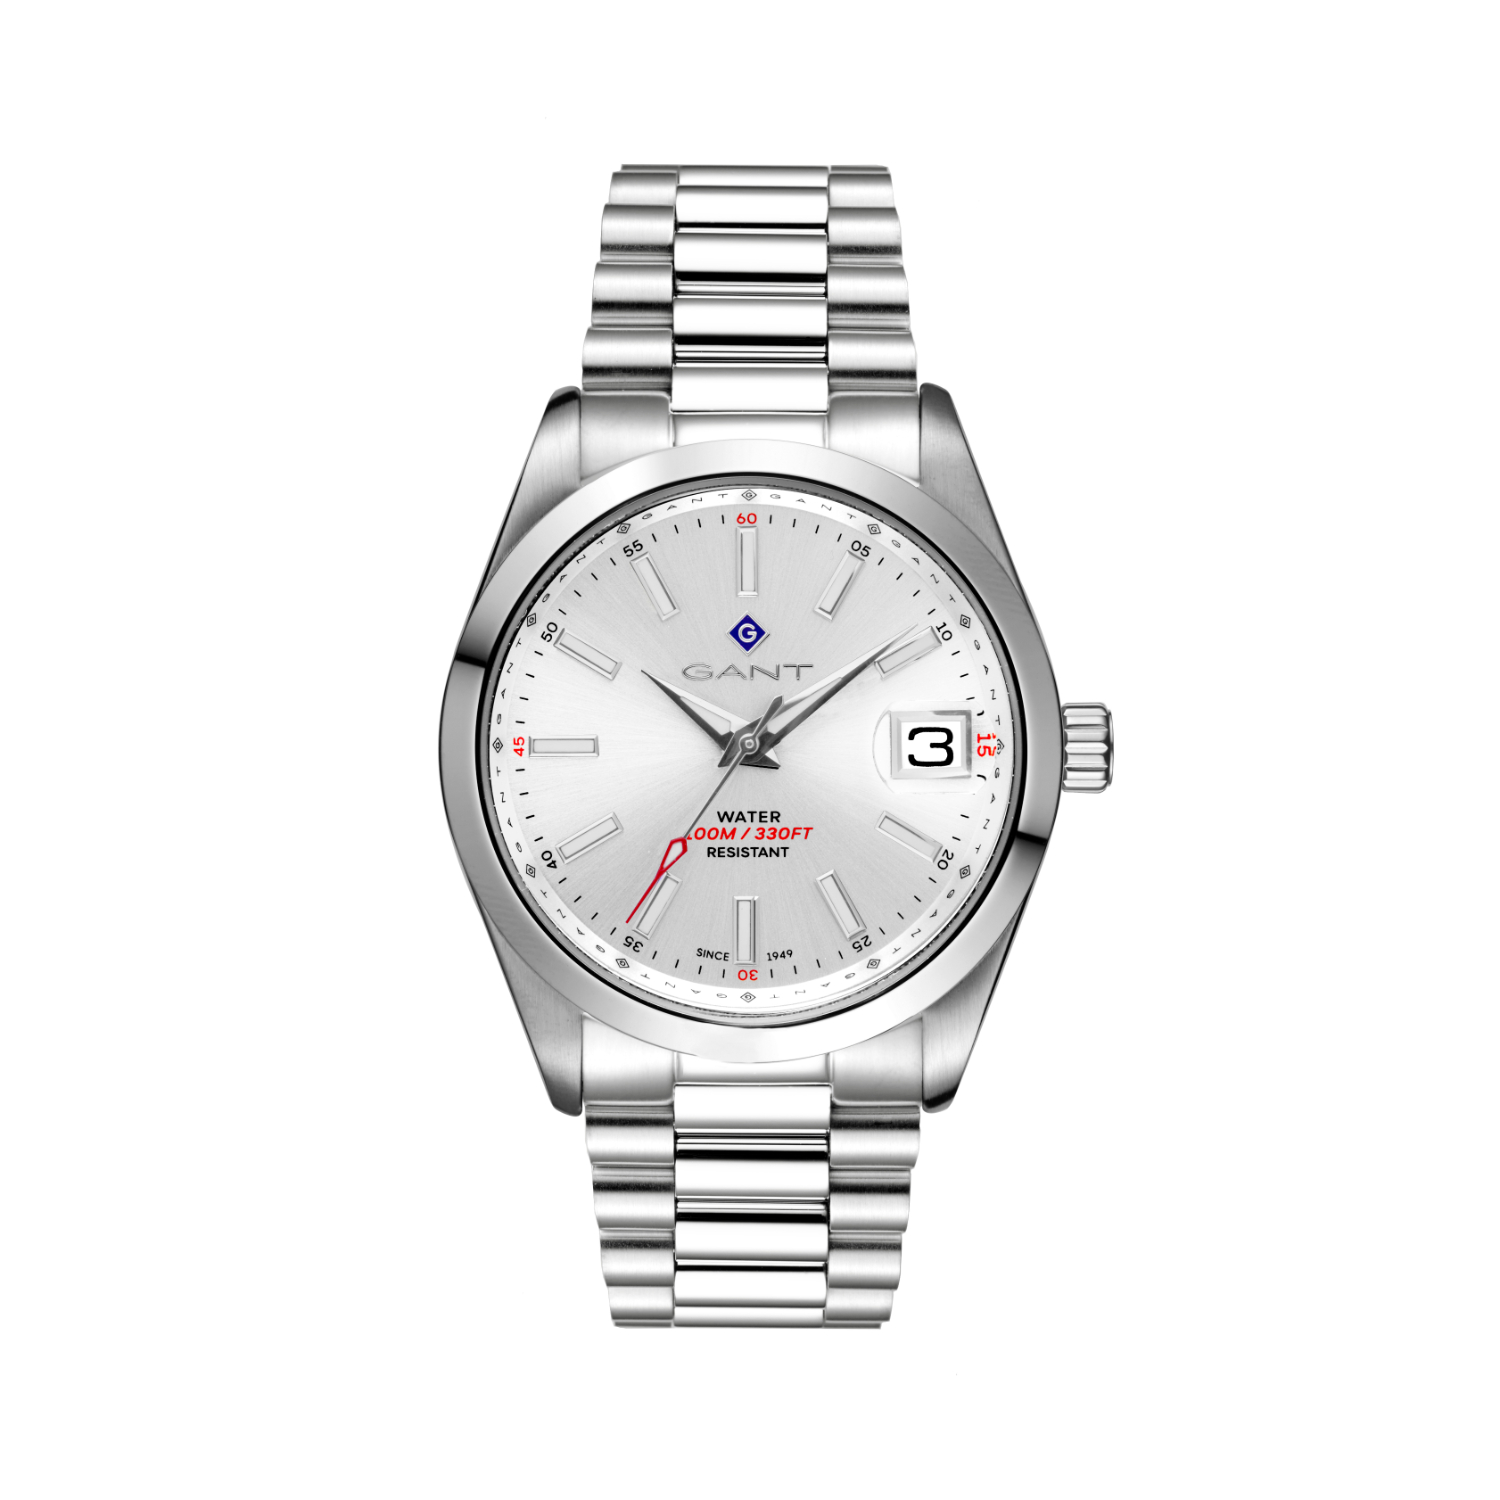 Mens GANT stainless steel watch with white dial and silver bracelet.